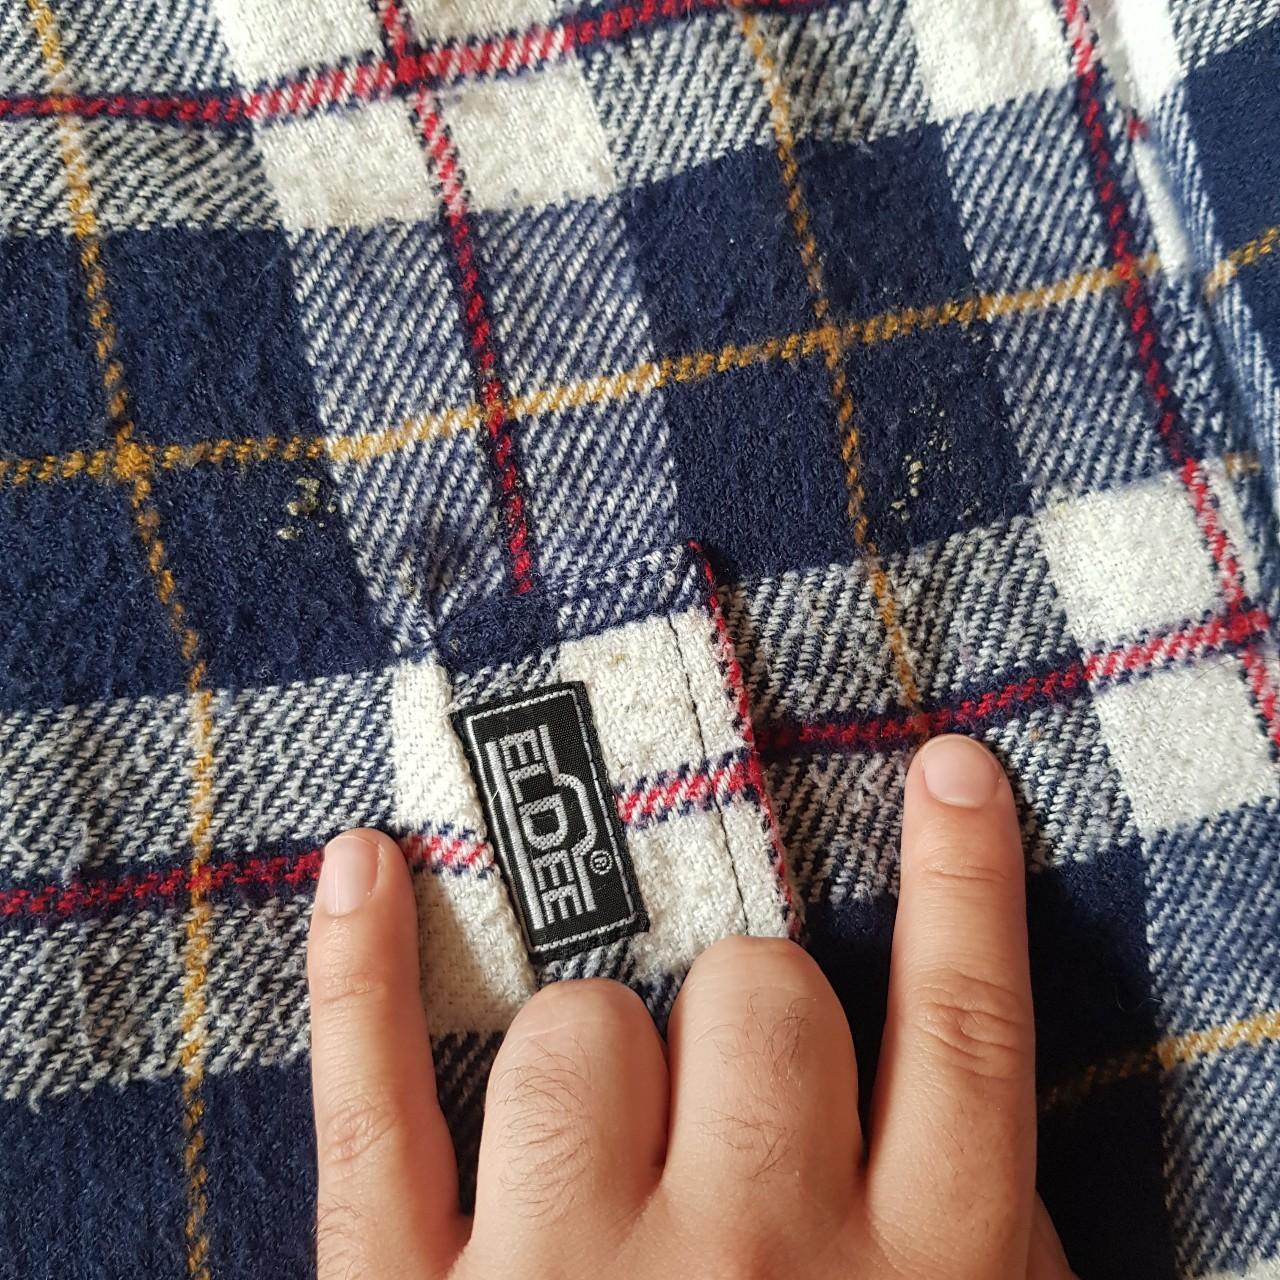 Vintage padded chequered flannel shacket